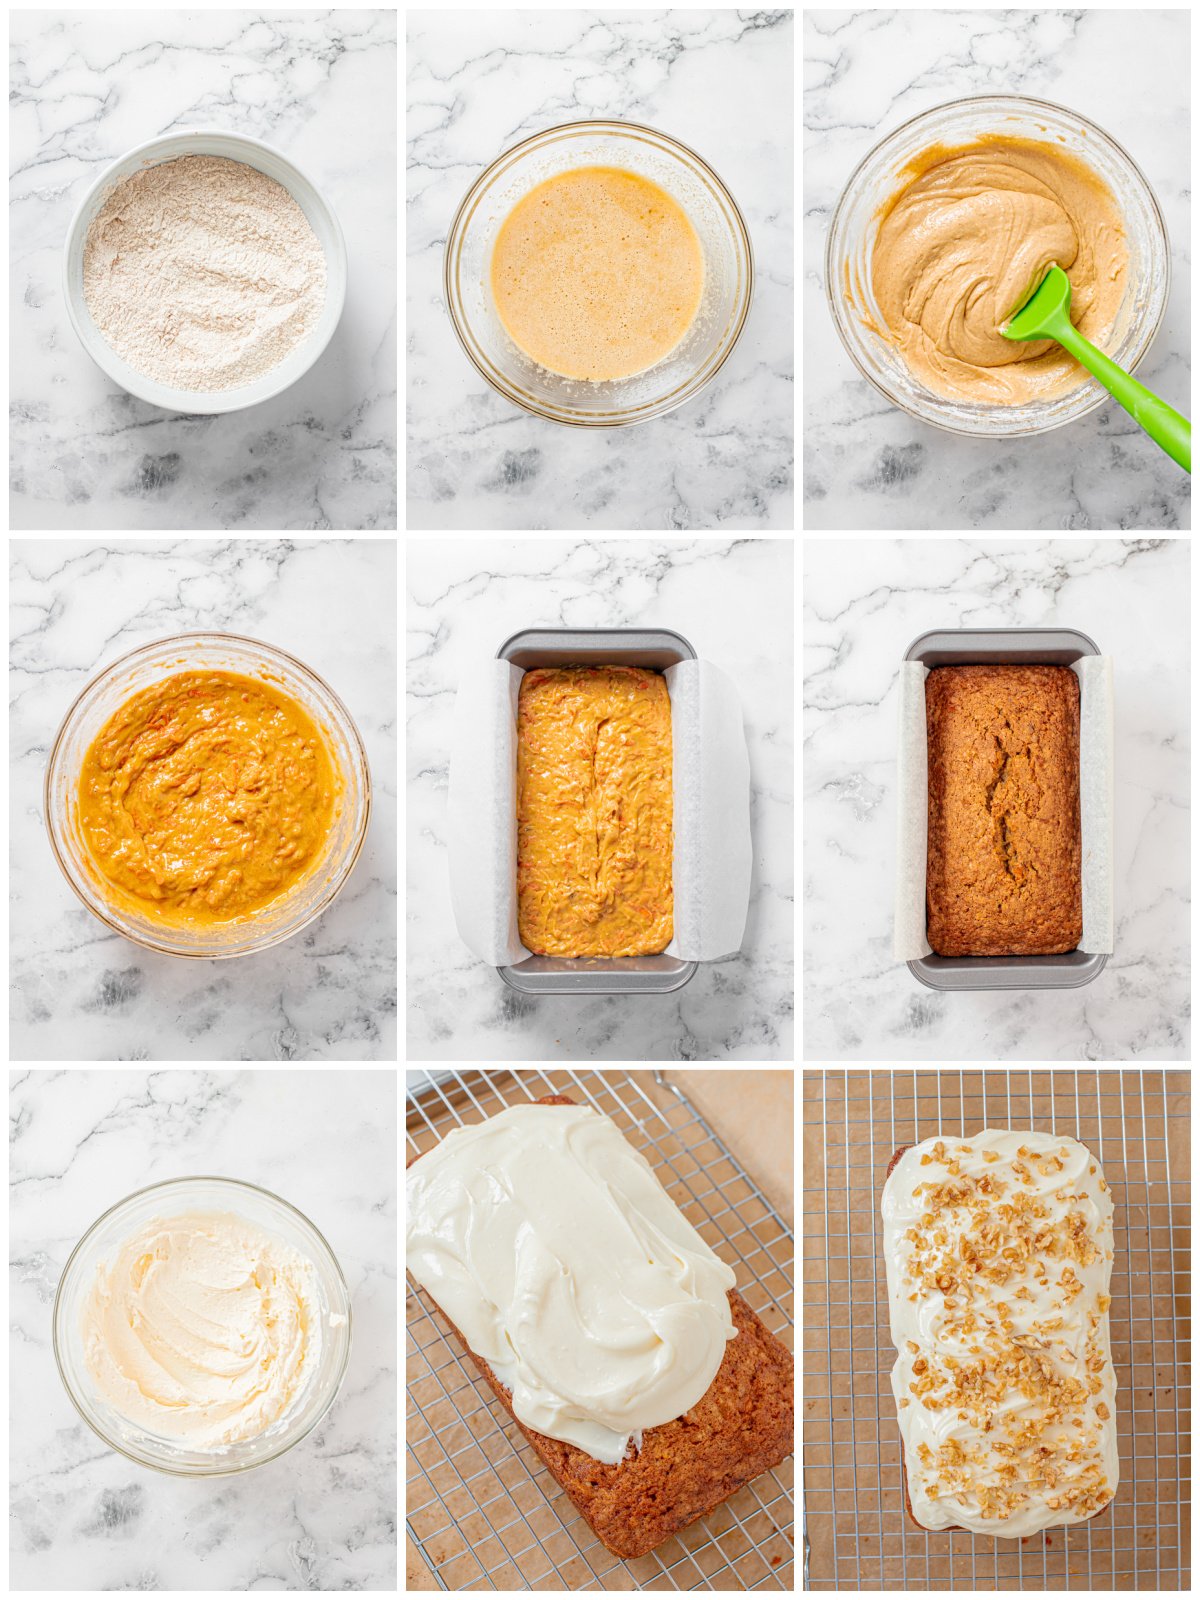 Step by step photos on how to make a Carrot Loaf Cake.